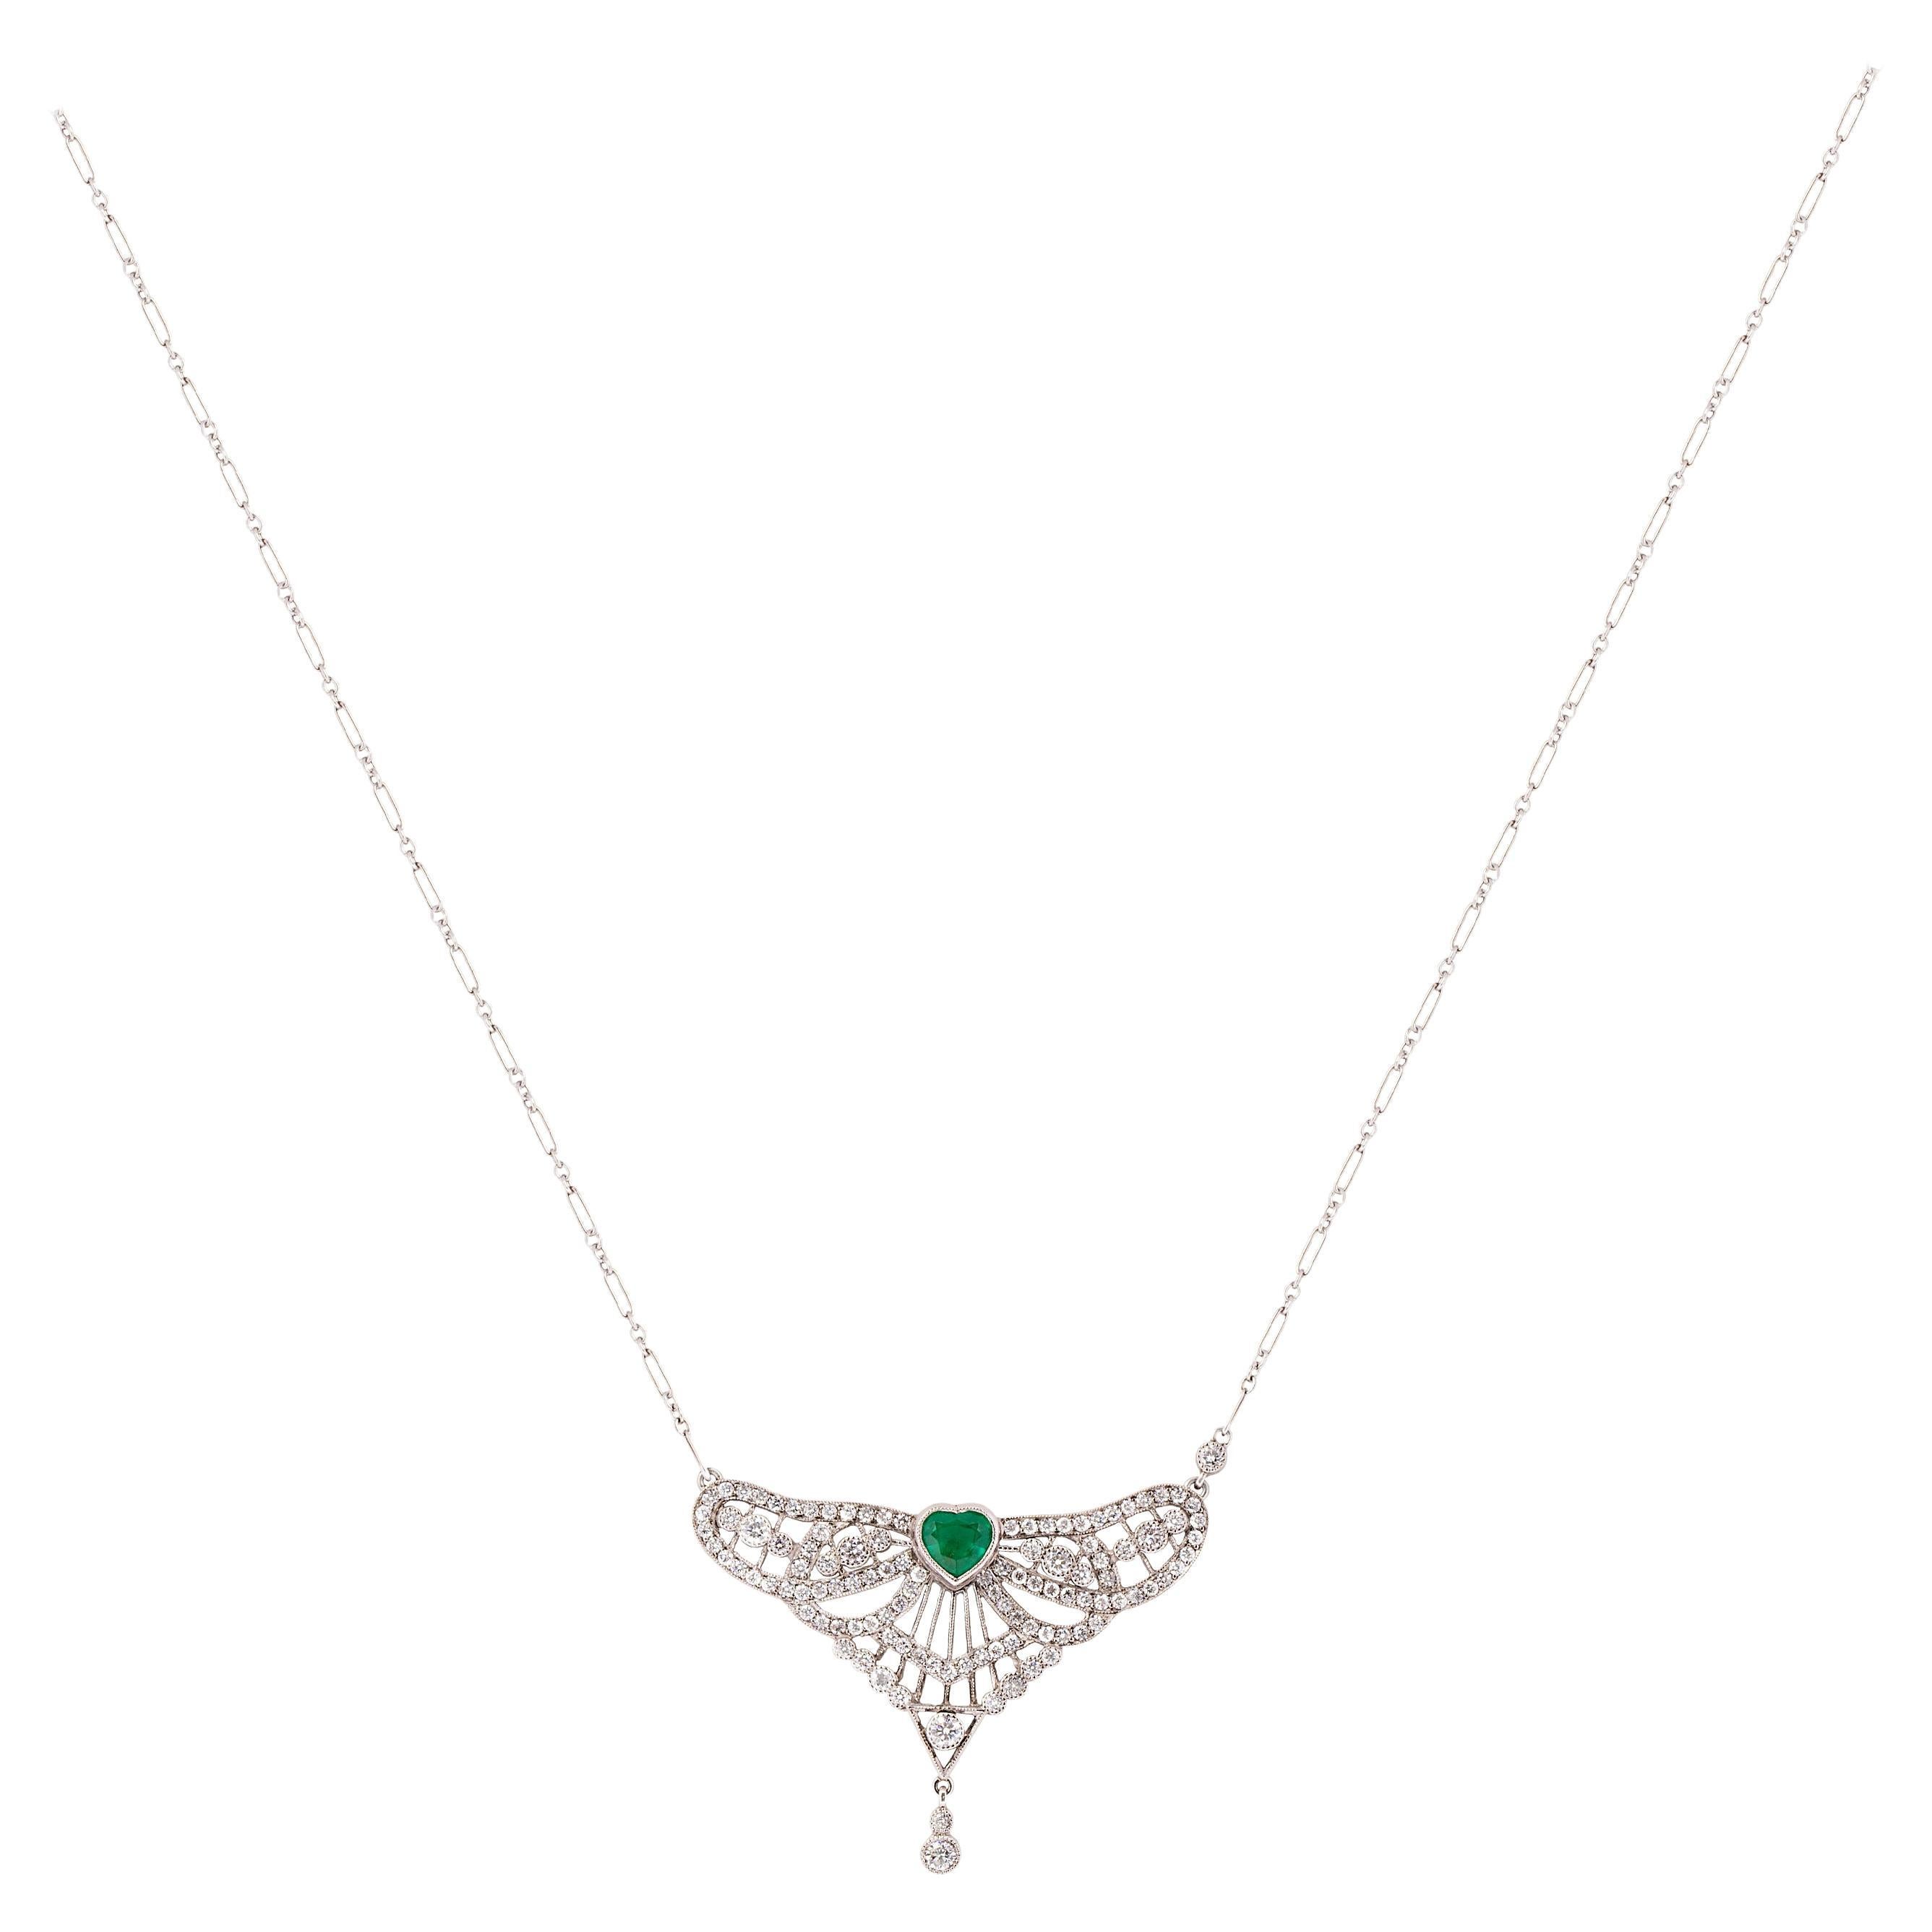 Gems Are Forever Art Deco Inspired Handcrafted 0.81 Ct Heart Emerald and Diamond